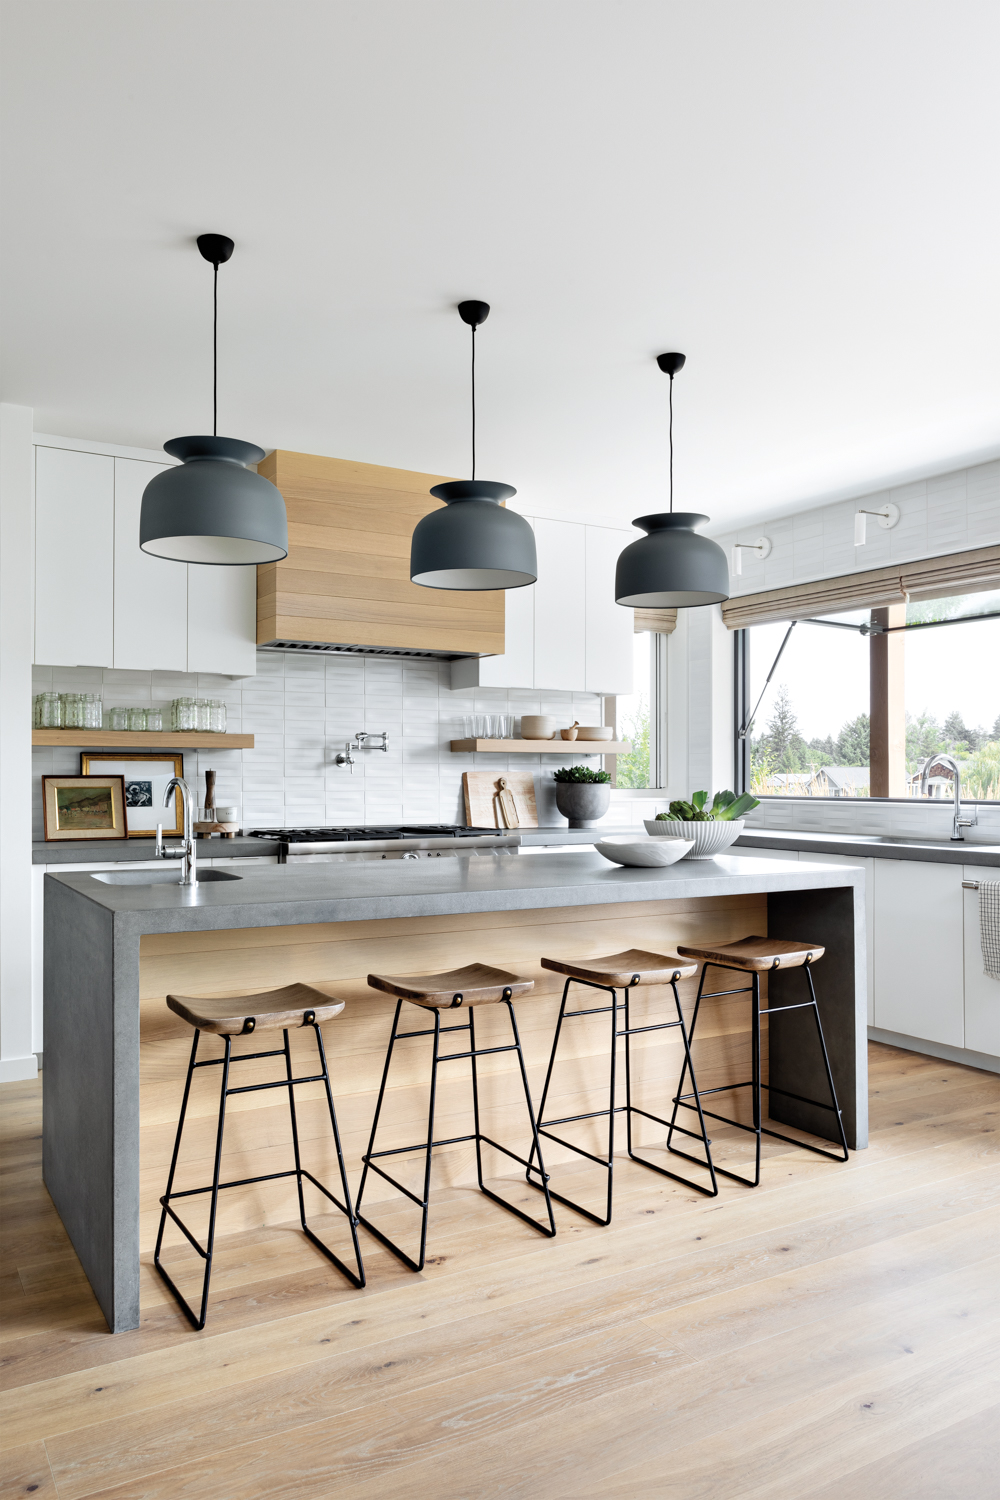 airy modern kitchen features pendant lights over island counter